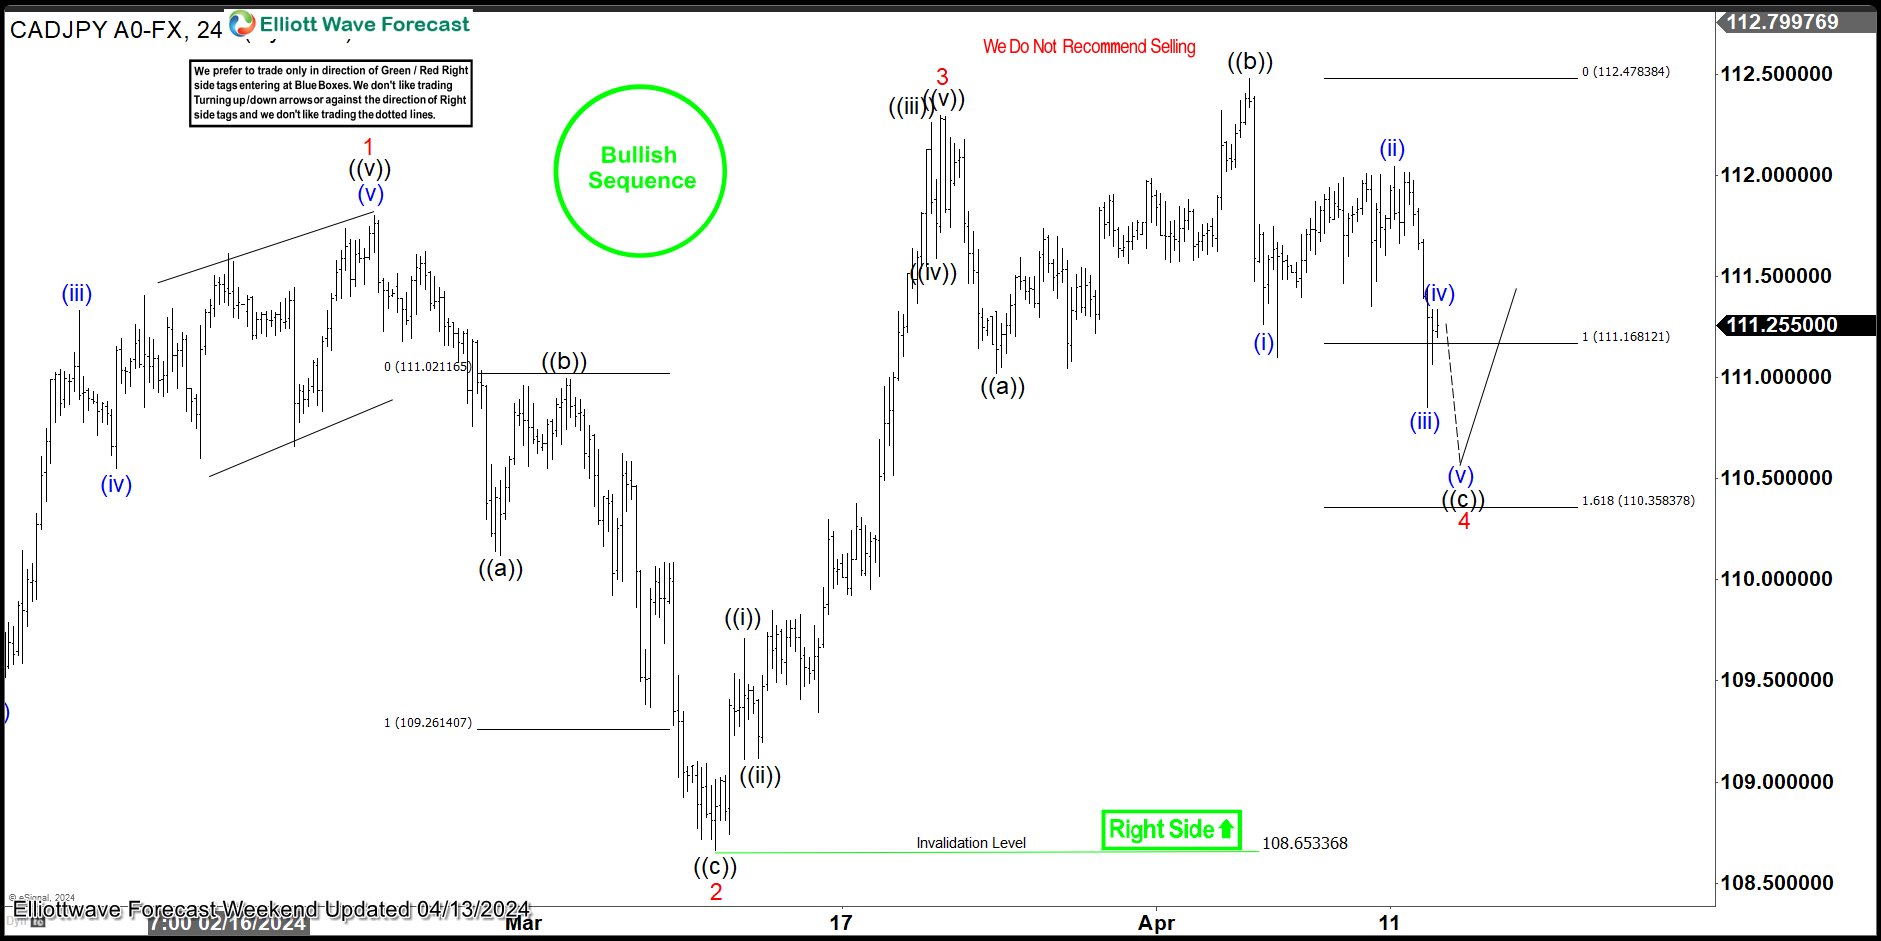 CADJPY Elliott Wave : Forecasting the Rally After 3 Waves Pull Back